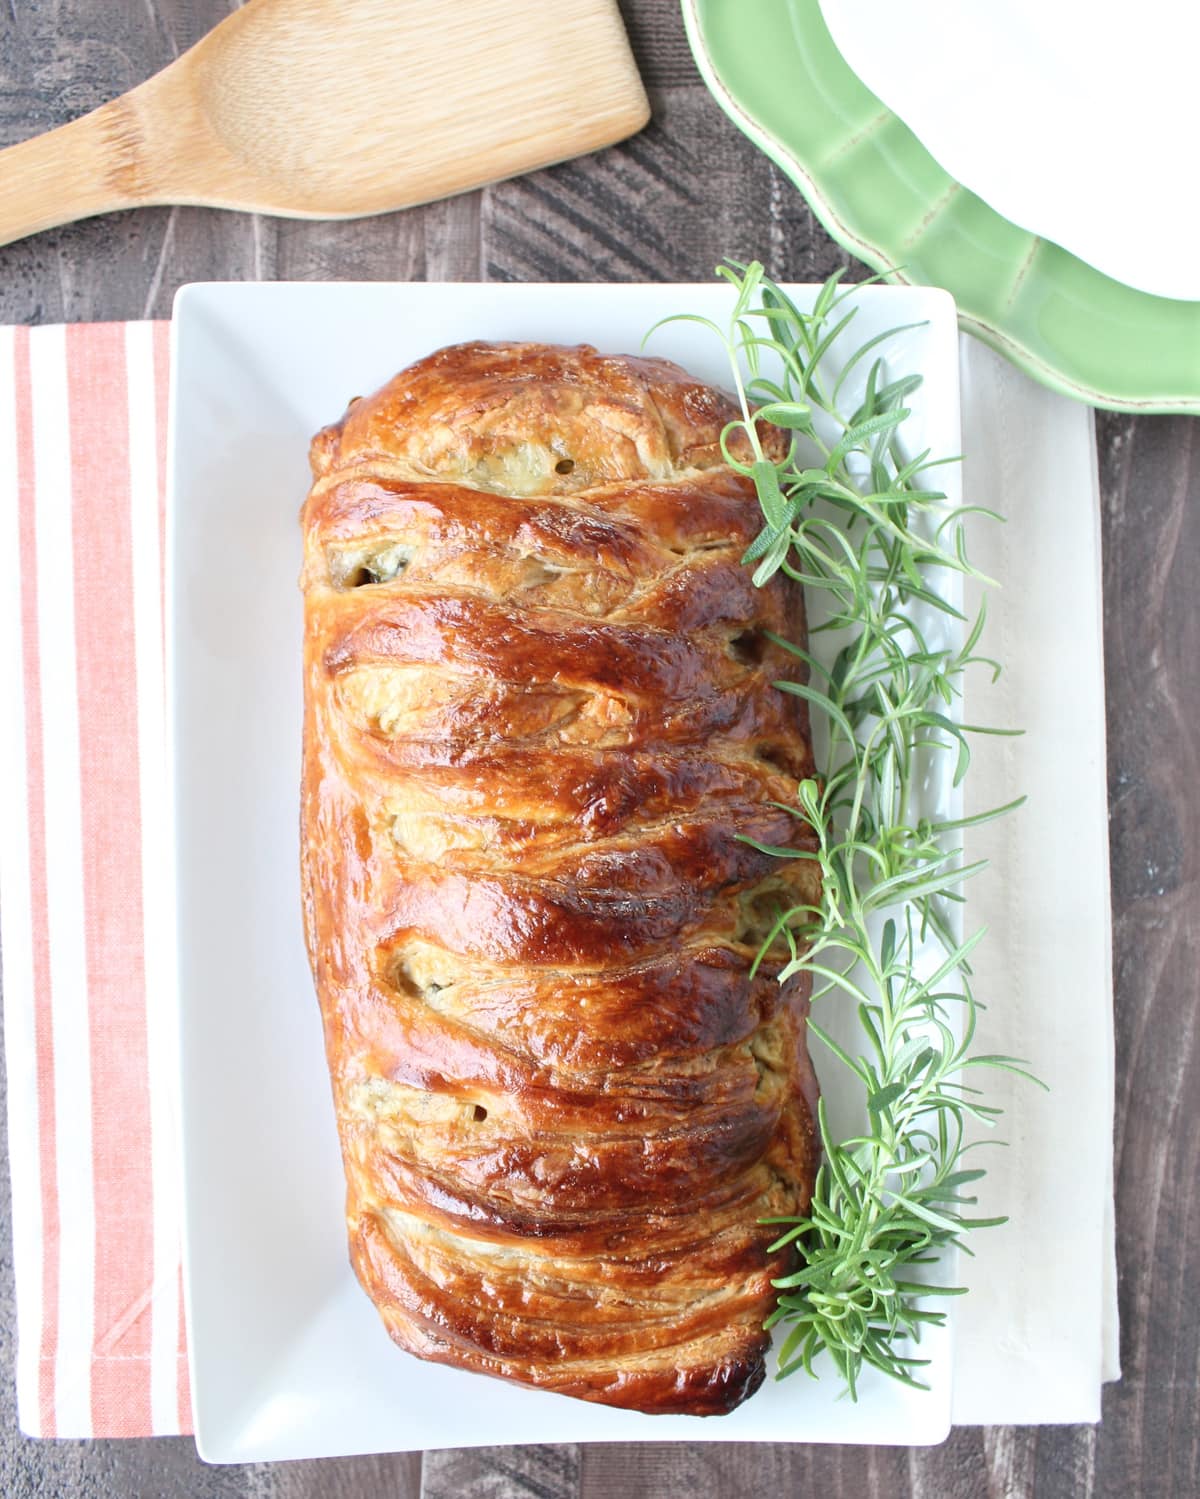 baked braided filled puff pastry on plate with fresh rosemary